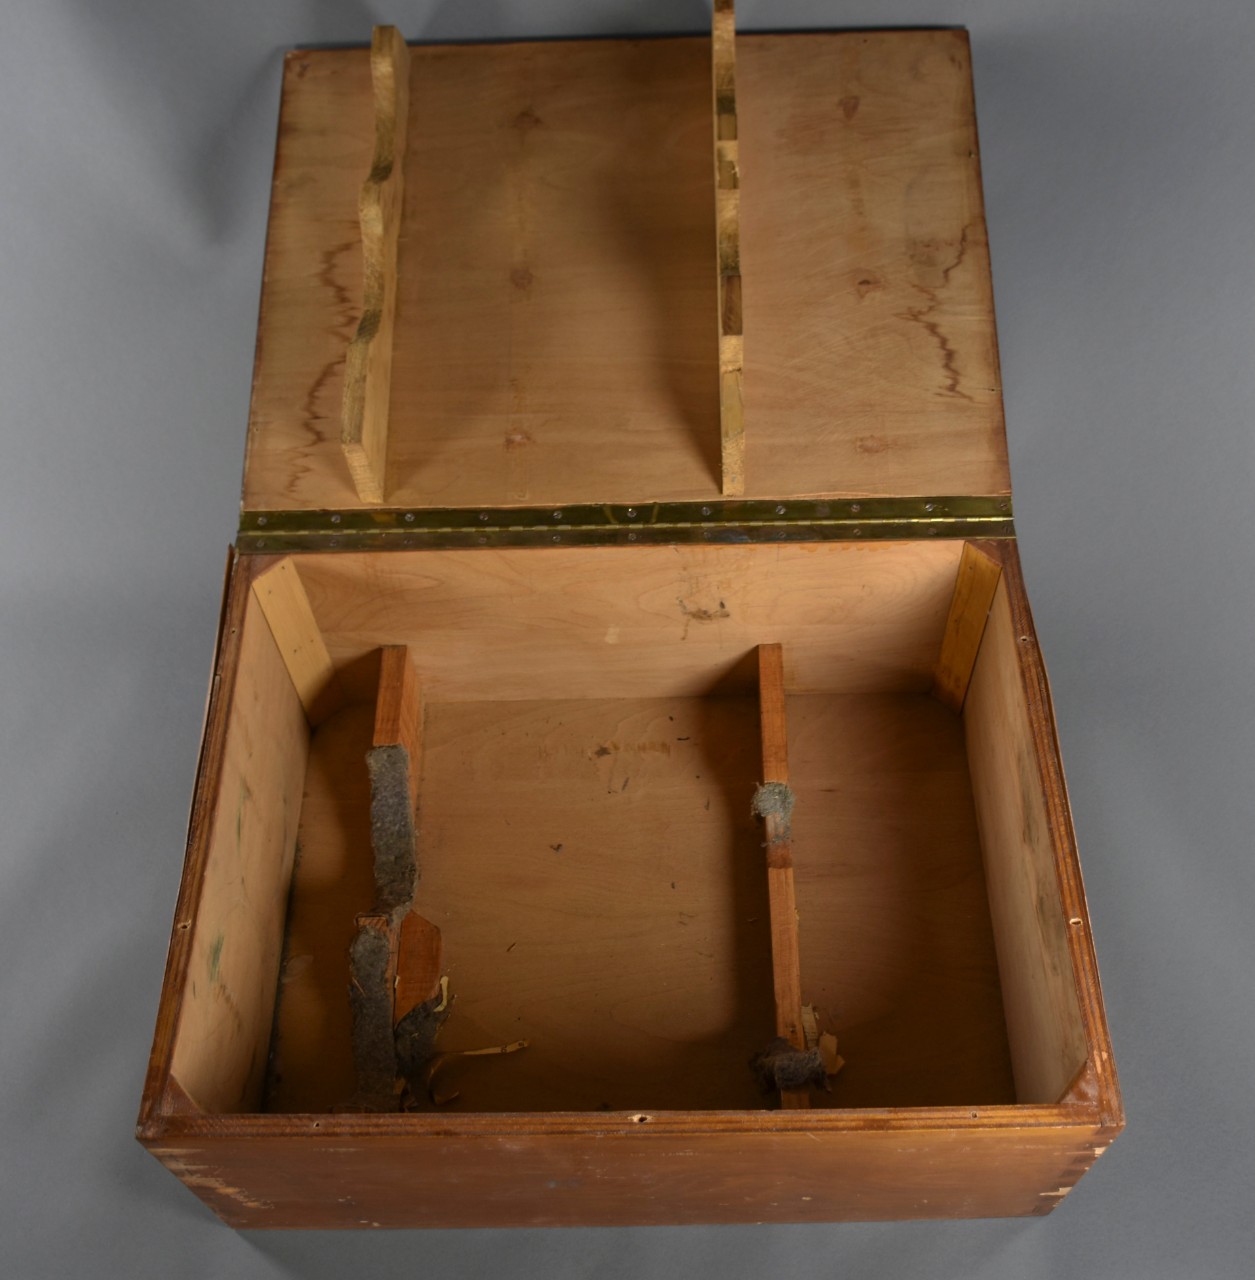 Wooden case with open lid and custom mount for holding Big Eye Japanese Binoculars